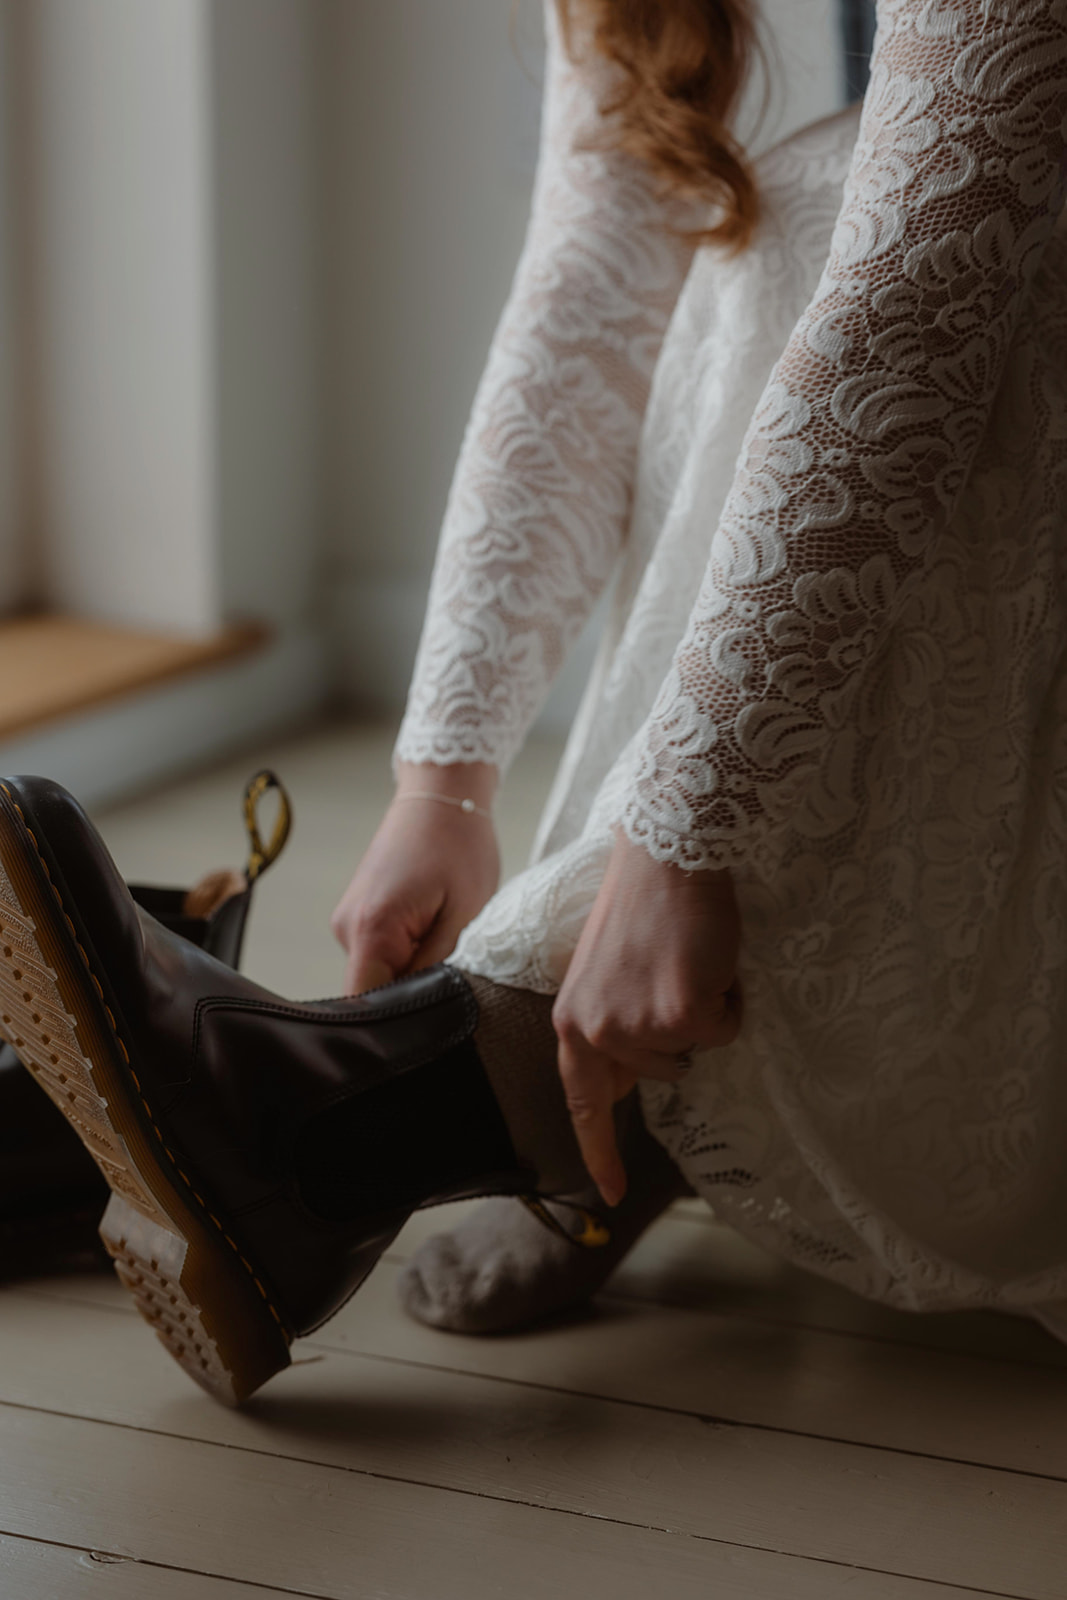 Holly looks beautiful in her white dress and shoes as she gets ready for her Glencoe elopement ceremony.